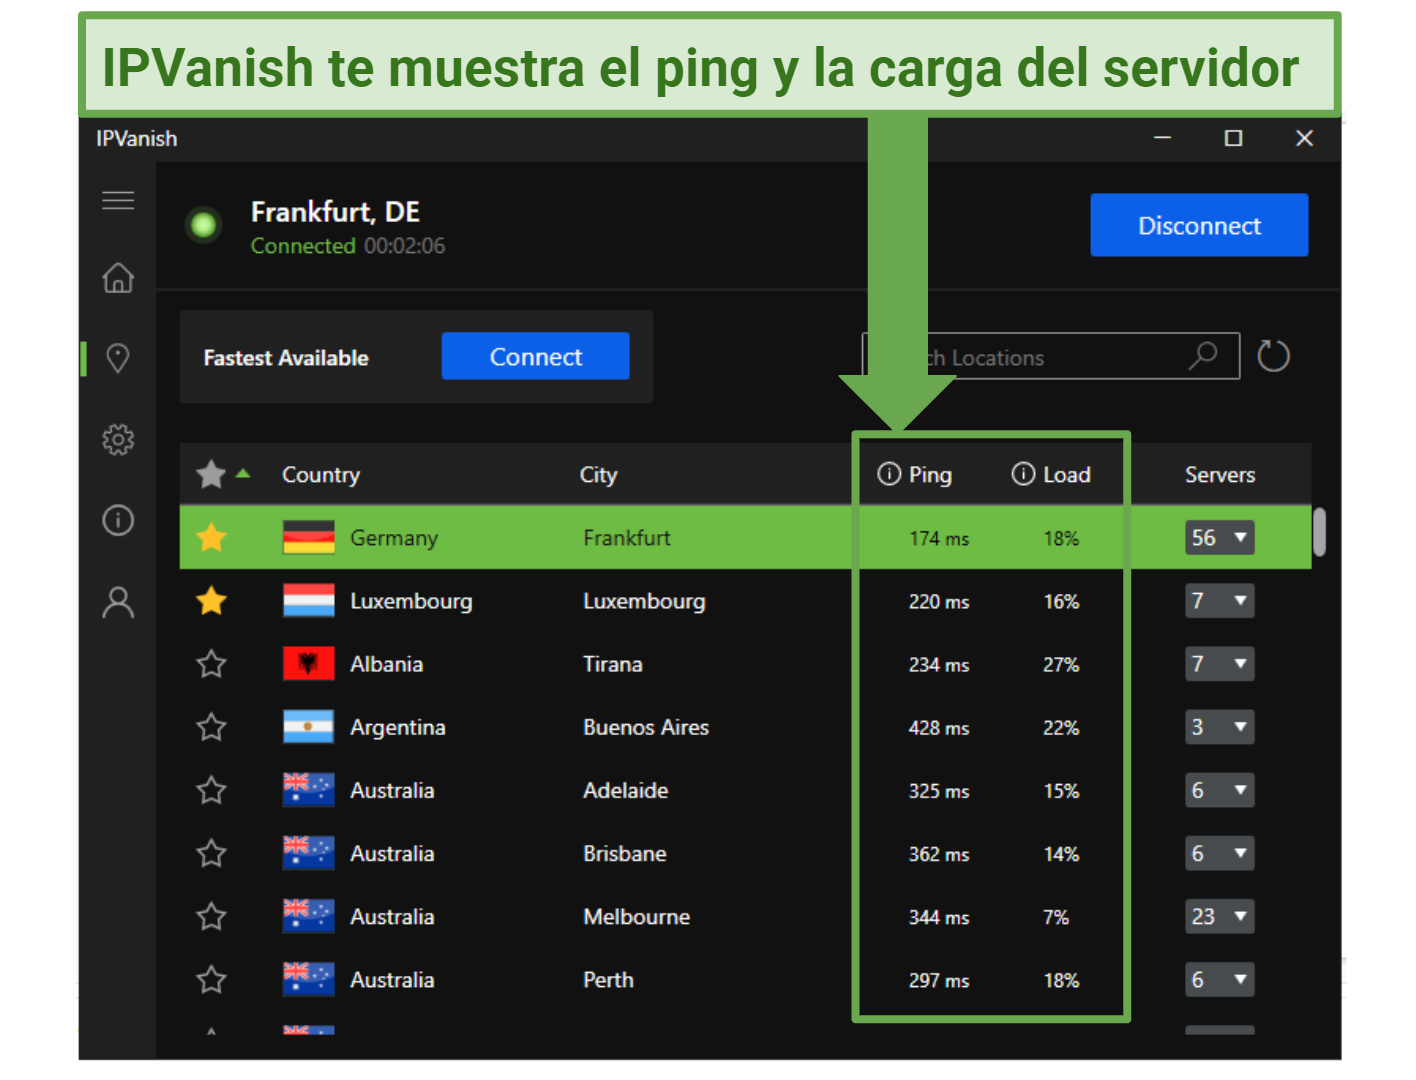 Screenshot showing IPVanish server list and each server's ping and load